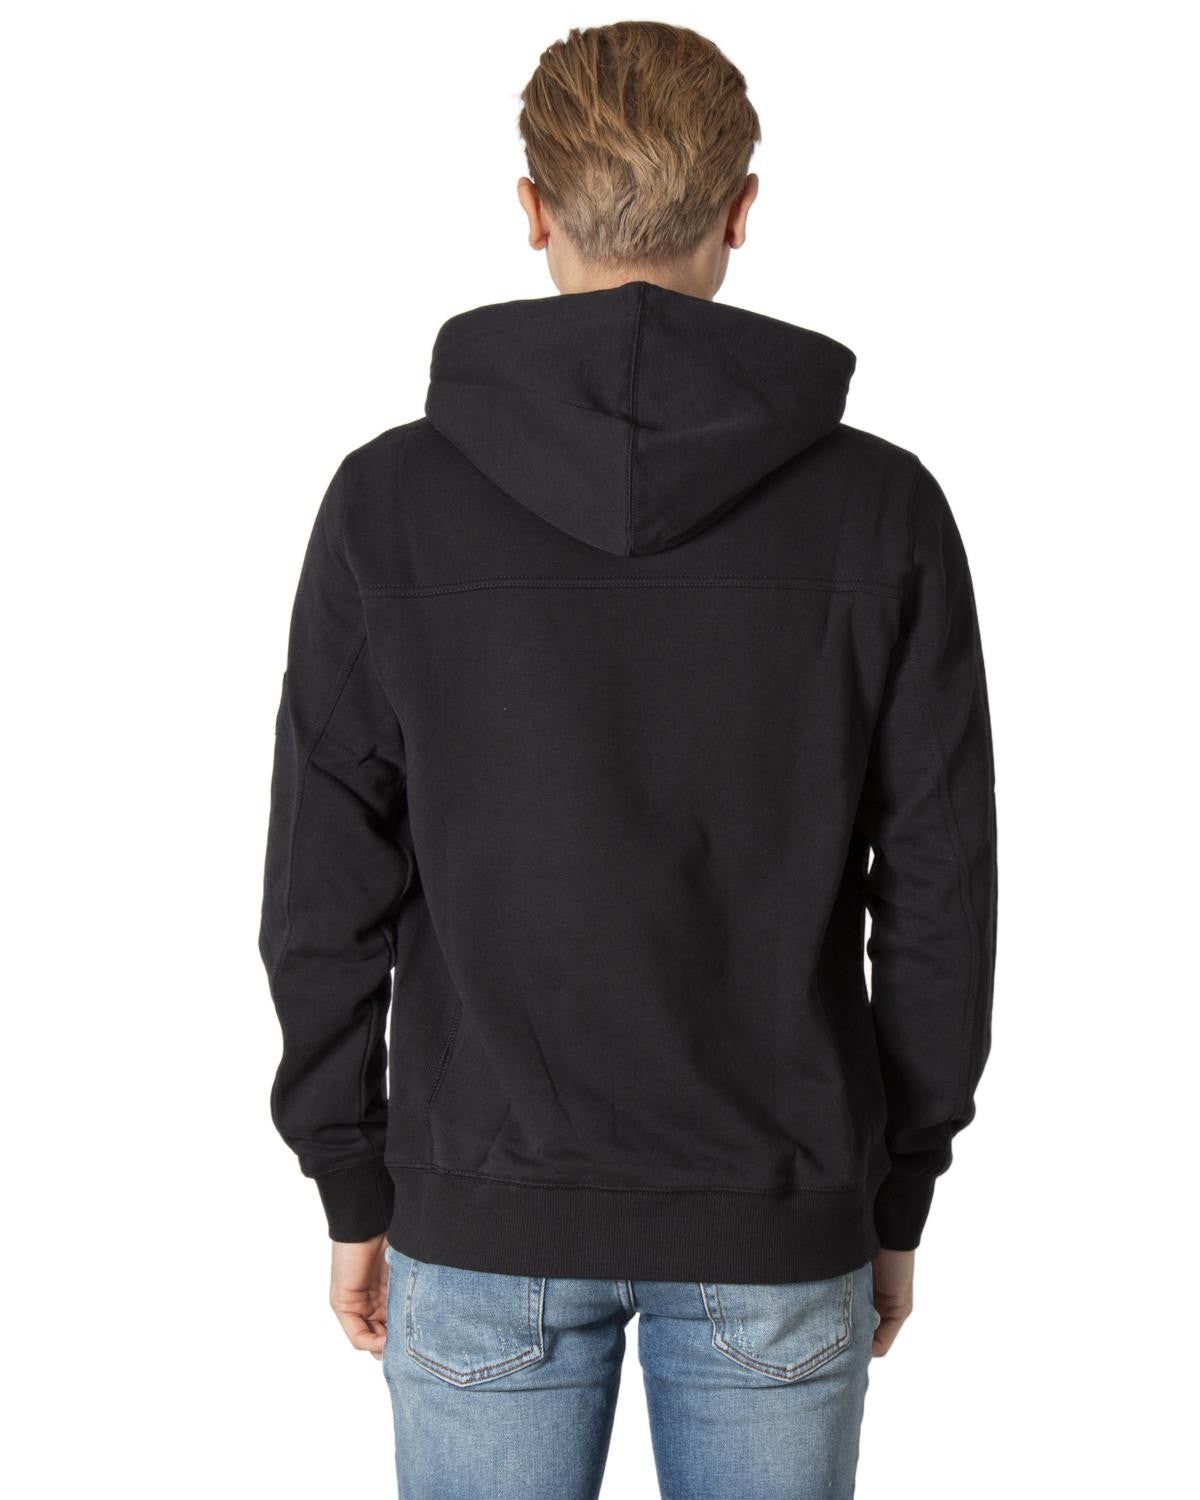 Brand: Calvin Klein Jeans Gender: Men Type: Sweatshirts Season: Fall/Winter  PRODUCT DETAIL • Color: black • Collar: hood  COMPOSITION AND MATERIAL • Composition: -100% cotton  •  Washing: machine wash at 30° -100% Cotton